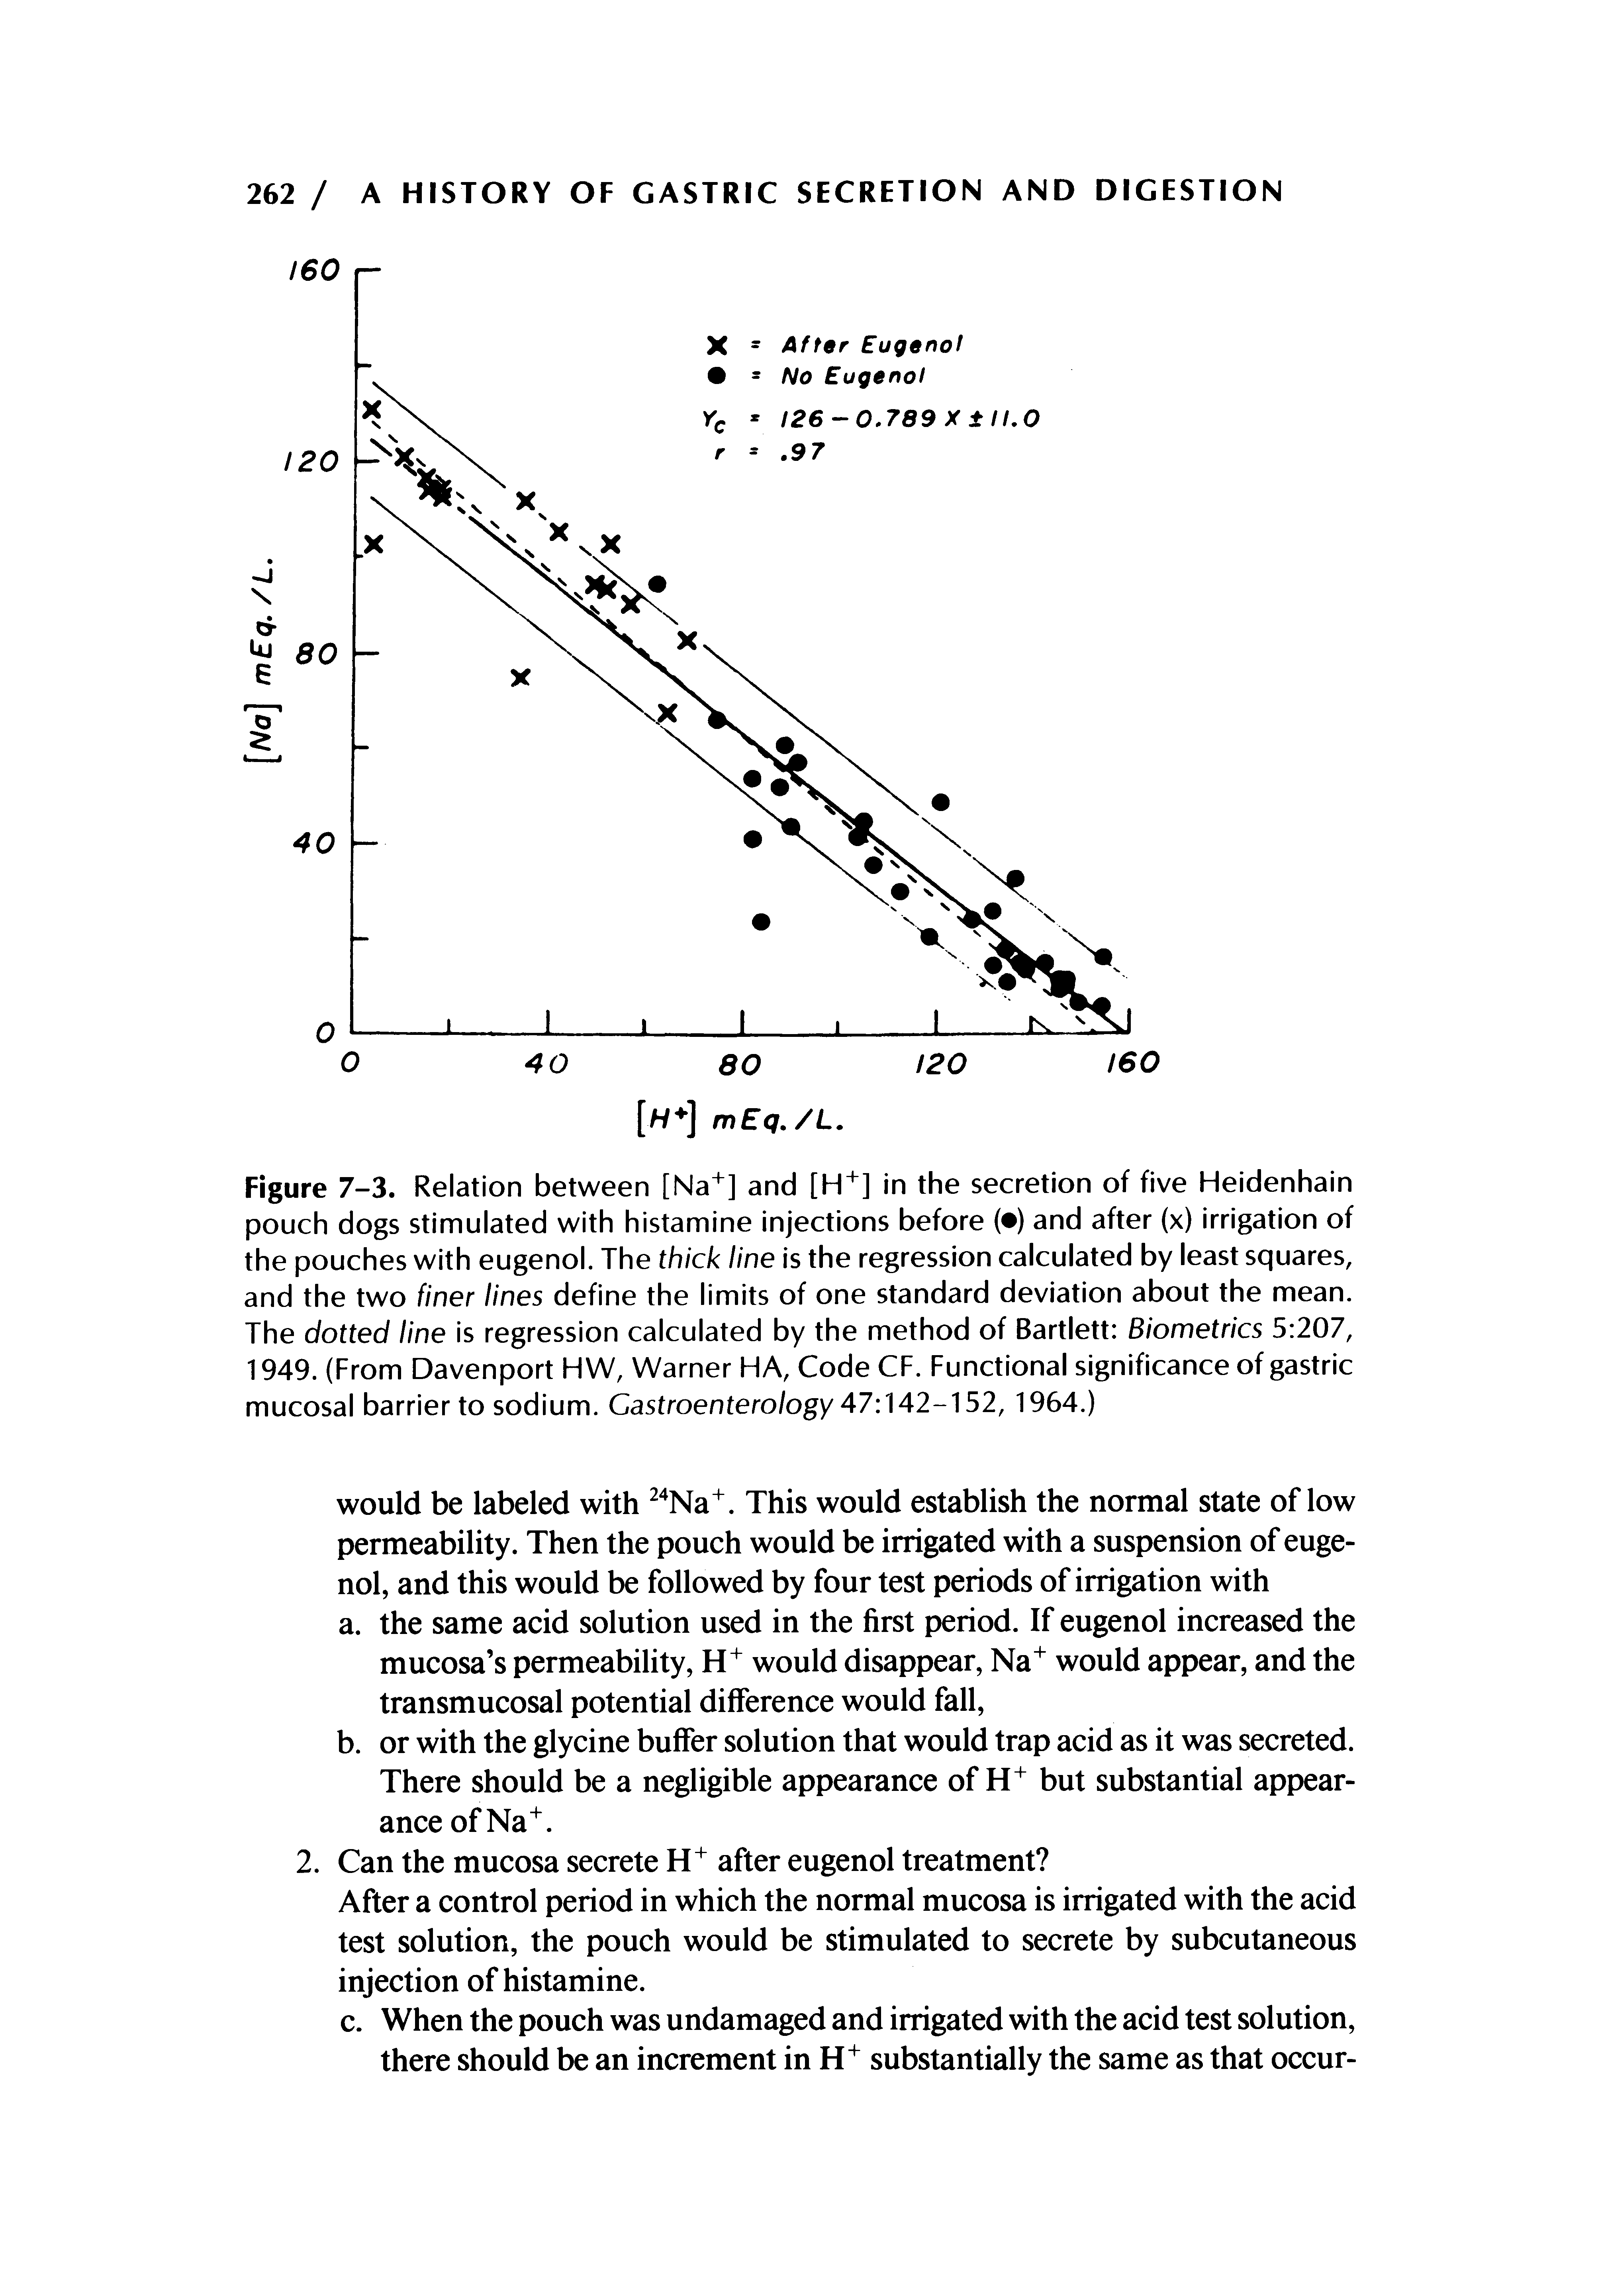 Figure 7-3. Relation between [Na ] and [H ] in the secretion of five Heidenhain pouch dogs stimulated with histamine injections before ( ) and after (x) irrigation of the pouches with eugenol. The thick line is the regression calculated by least squares, and the two finer lines define the limits of one standard deviation about the mean. The dotted line is regression calculated by the method of Bartlett Biometrics 5 207, 1949. (From Davenport HW, Warner HA, Code CF. Functional significance of gastric mucosal barrier to sodium. Gastroenterology 47 A42- 52, 1964.)...